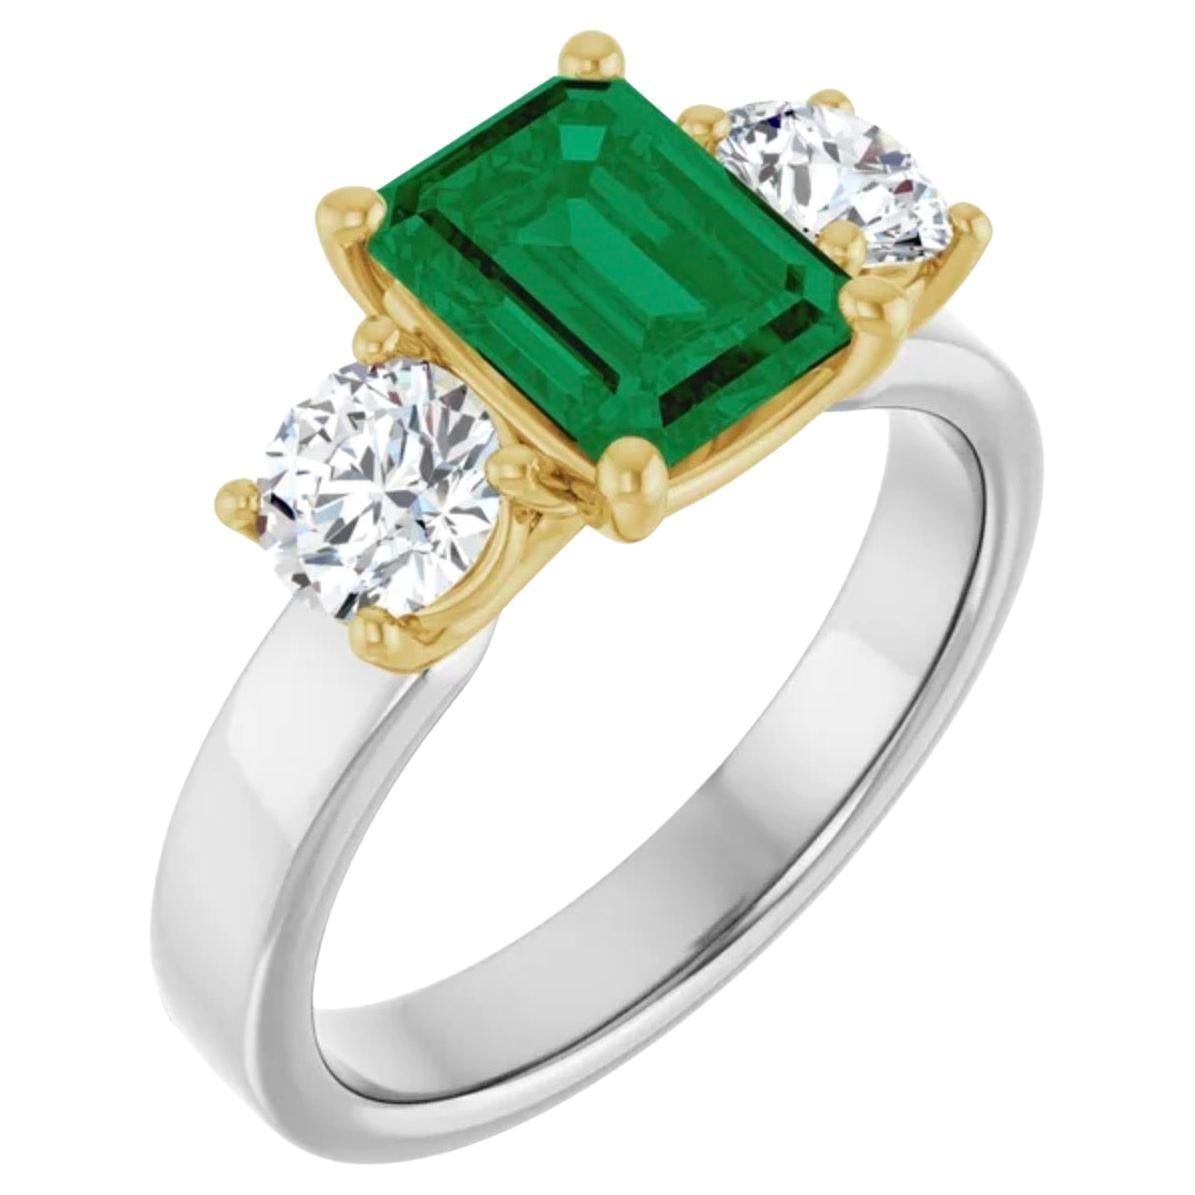 18K White/Yellow Ring  set wit a center Natural AAA Colombian Emerald Engagement Ring. The emerald is bright best green AAA clarity and color 7.6mm x 5.7mm aprox. 1.10 carats. 
Diamonds each 4.8mm Full Cut,  G-H color,  SI1 clarity 0.45ct 
\Total 2